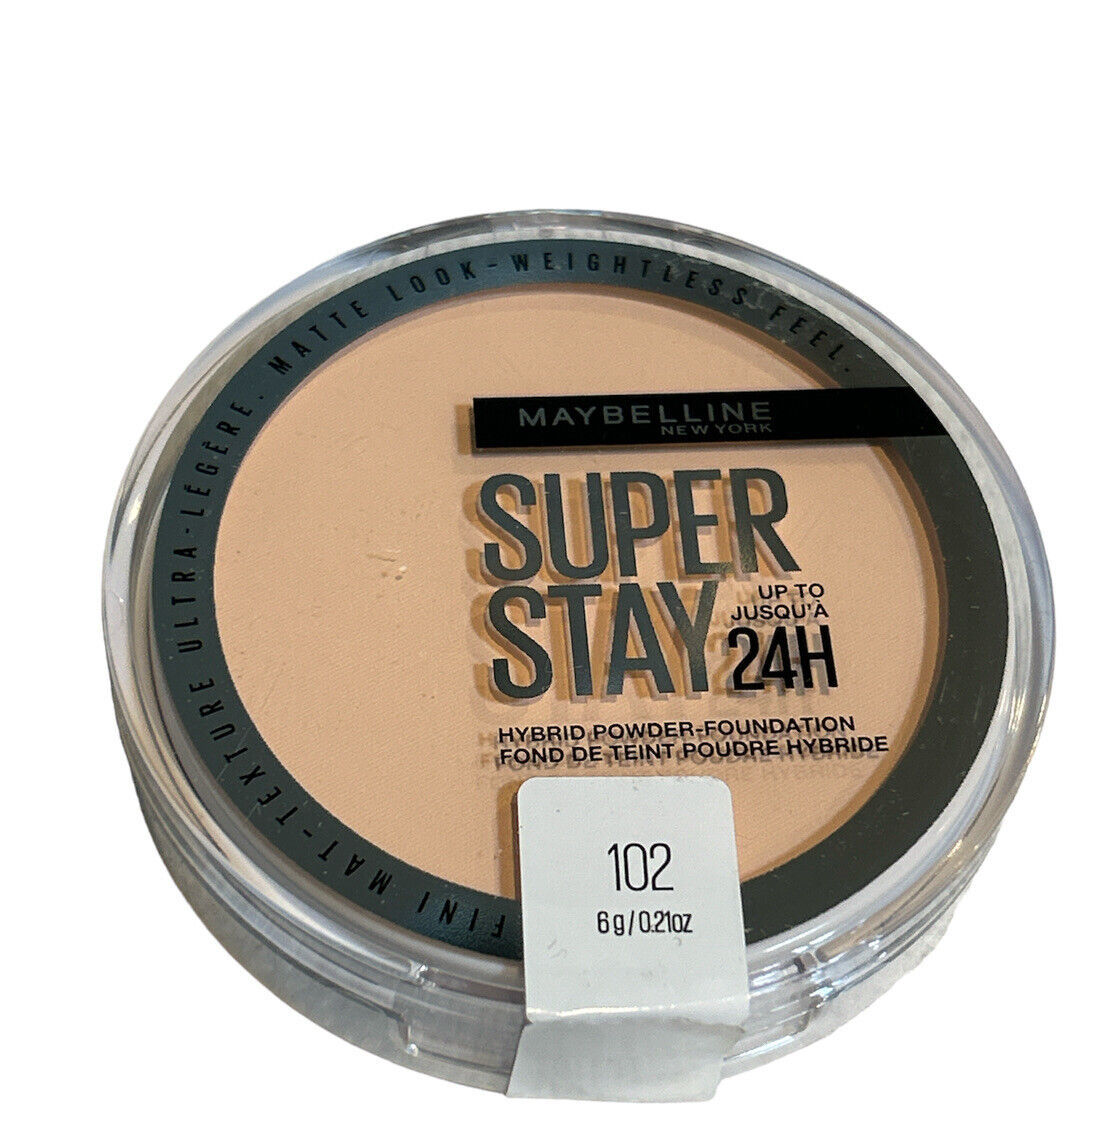 Primary image for Maybelline Super Stay up to 24HR Hybrid Powder-Foundation Matte Finish, #102